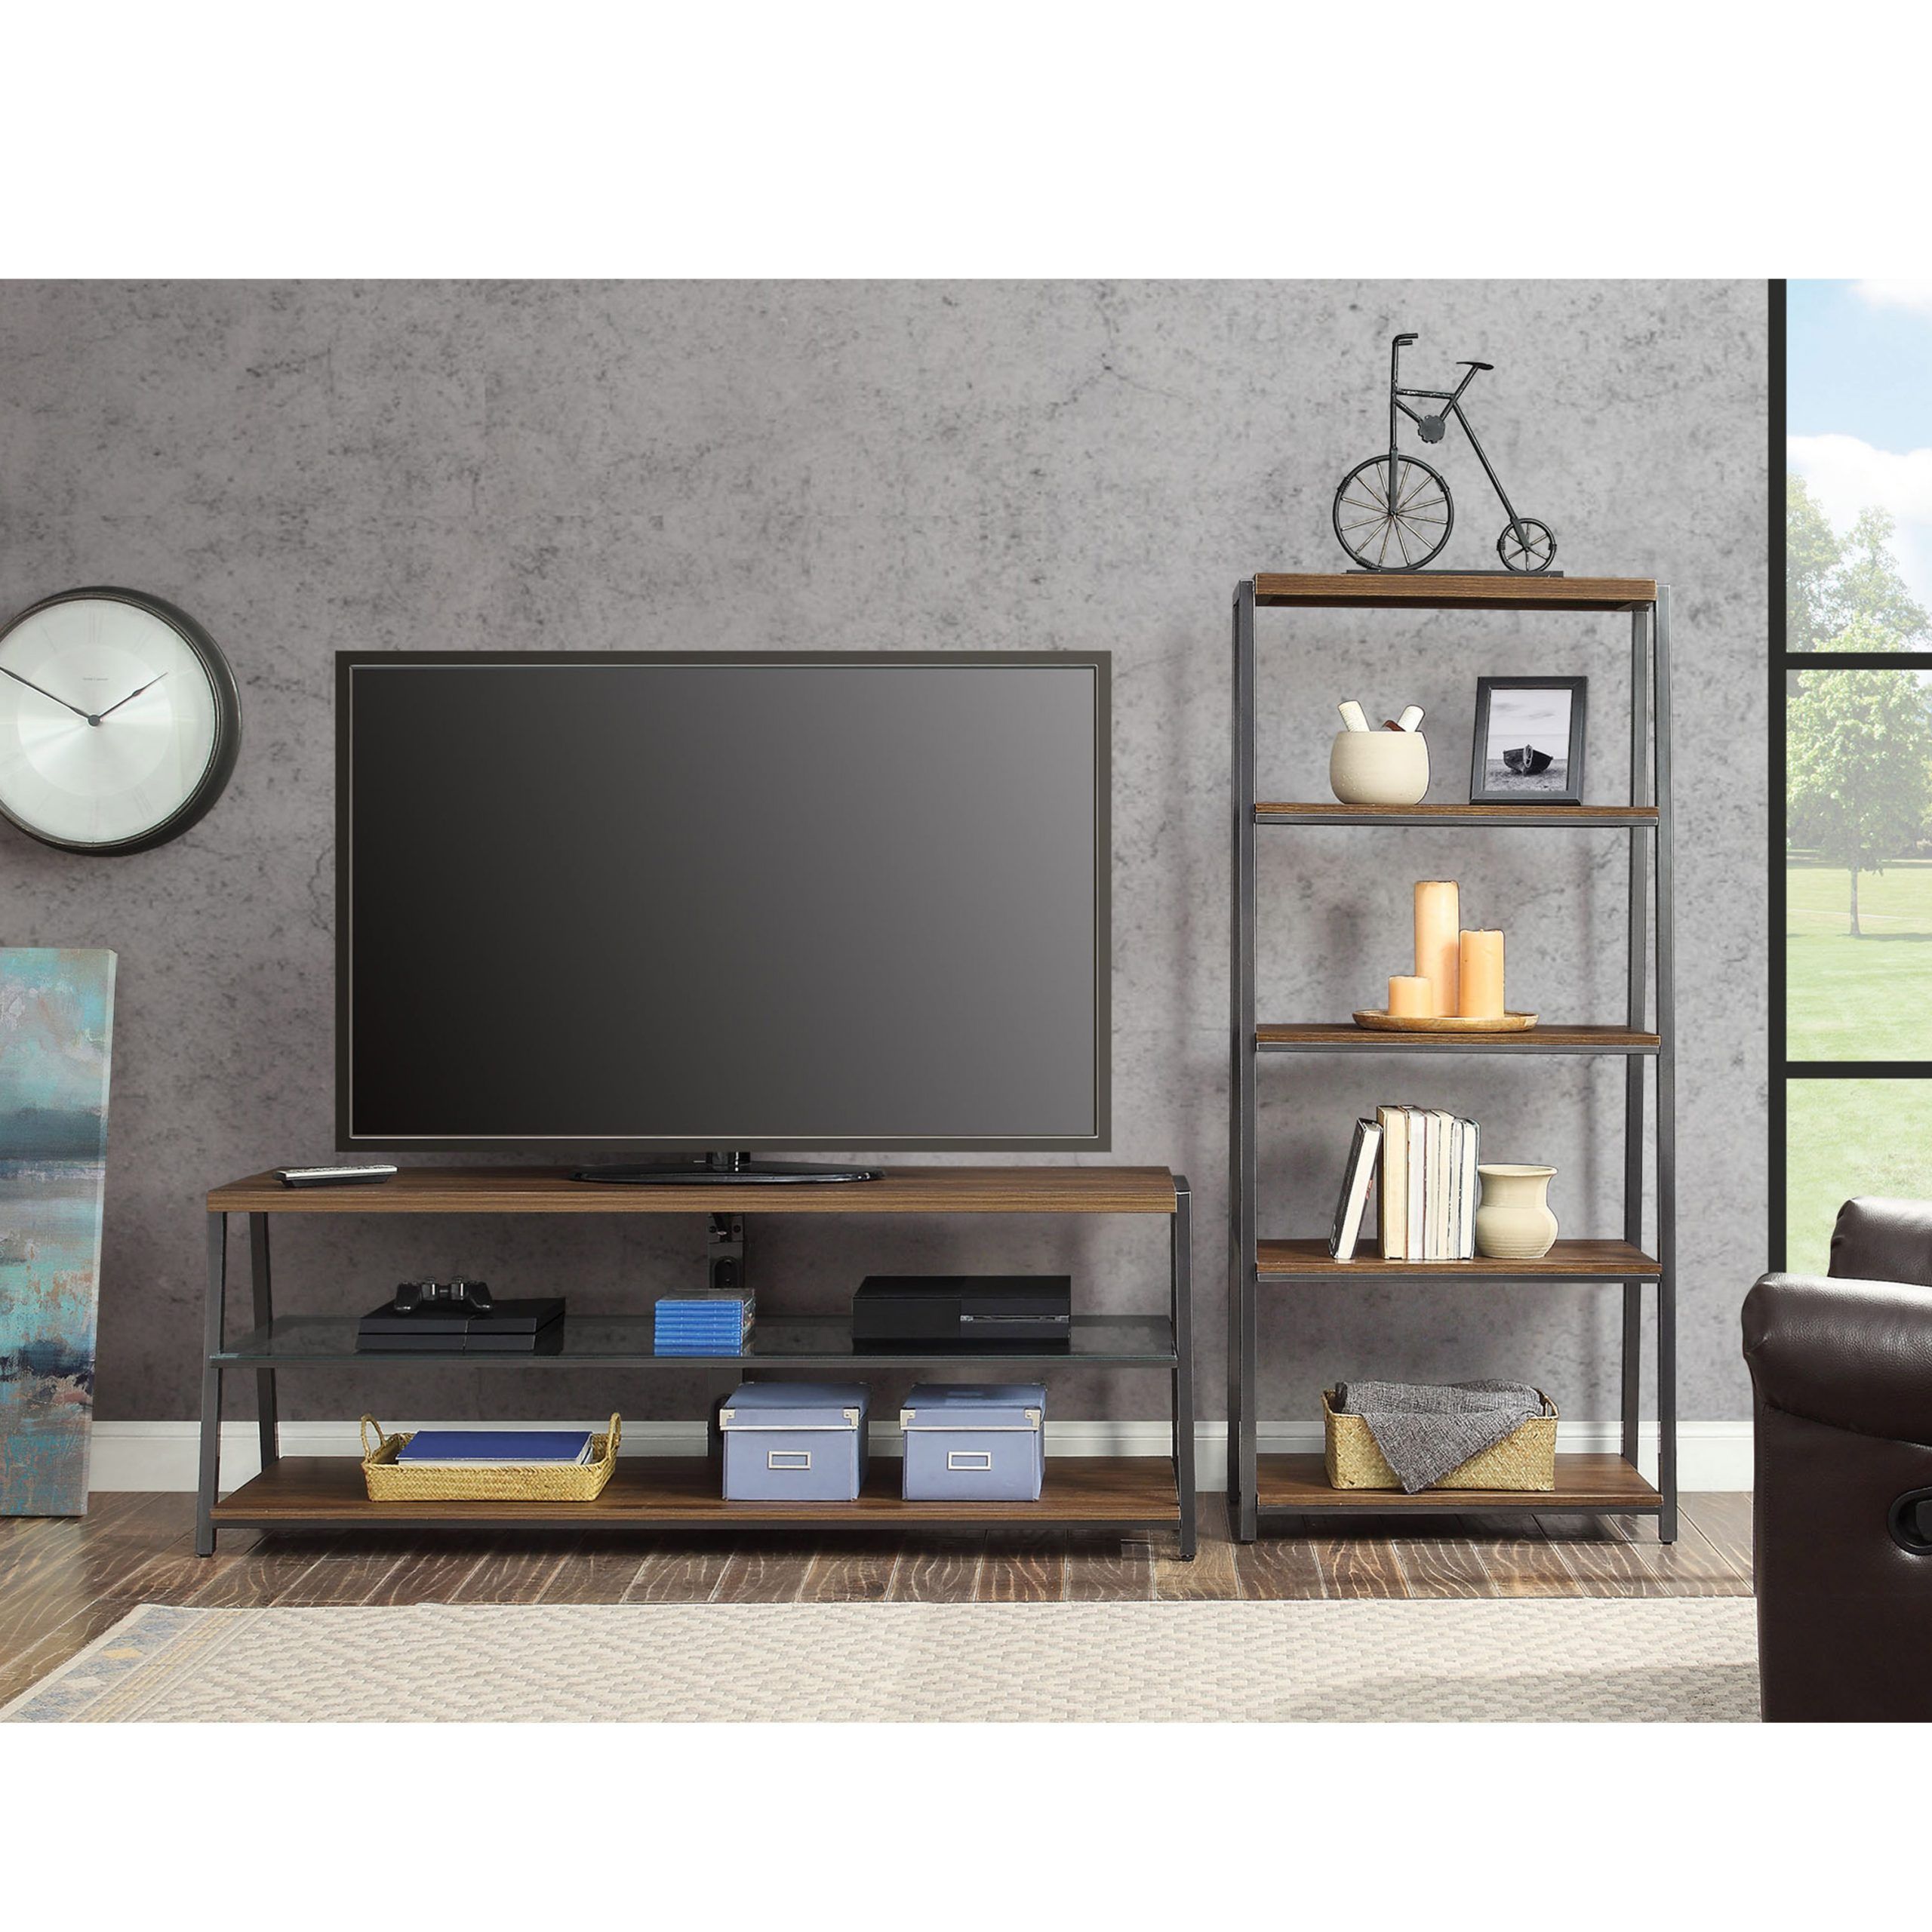 Mainstays Arris 3 In 1 Tv Stand And 4 Shelf Tower Book In Mainstays Arris 3 In 1 Tv Stands In Canyon Walnut Finish (Gallery 1 of 20)